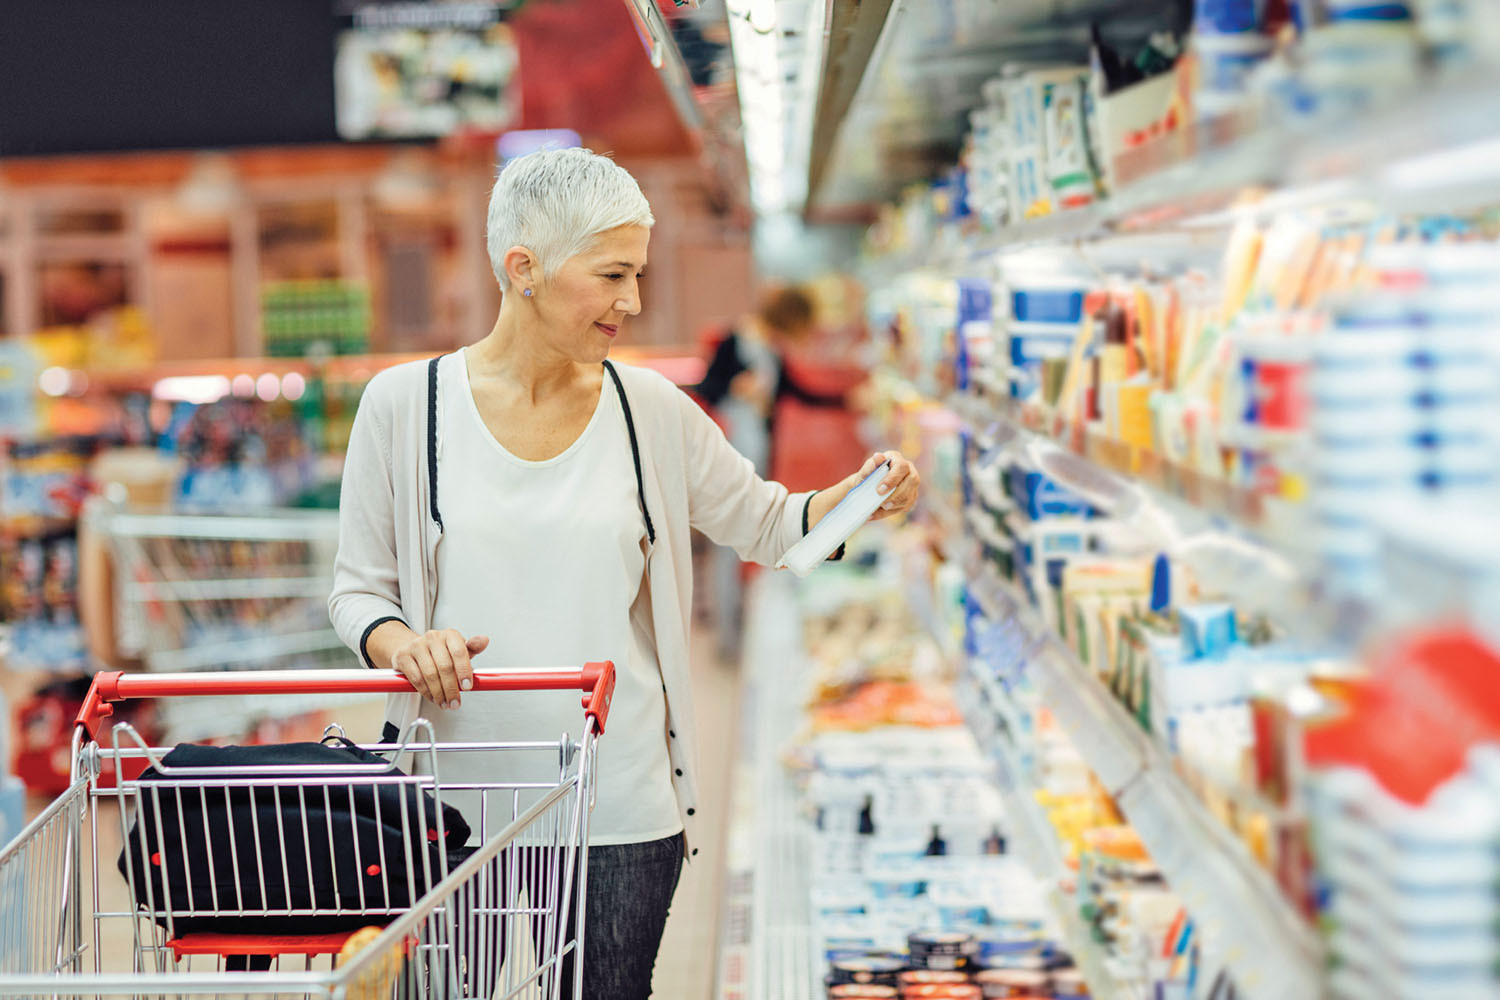 photo of a woman in a supermarket standing behind her shopping cart looking at a food label in the refrigerated section